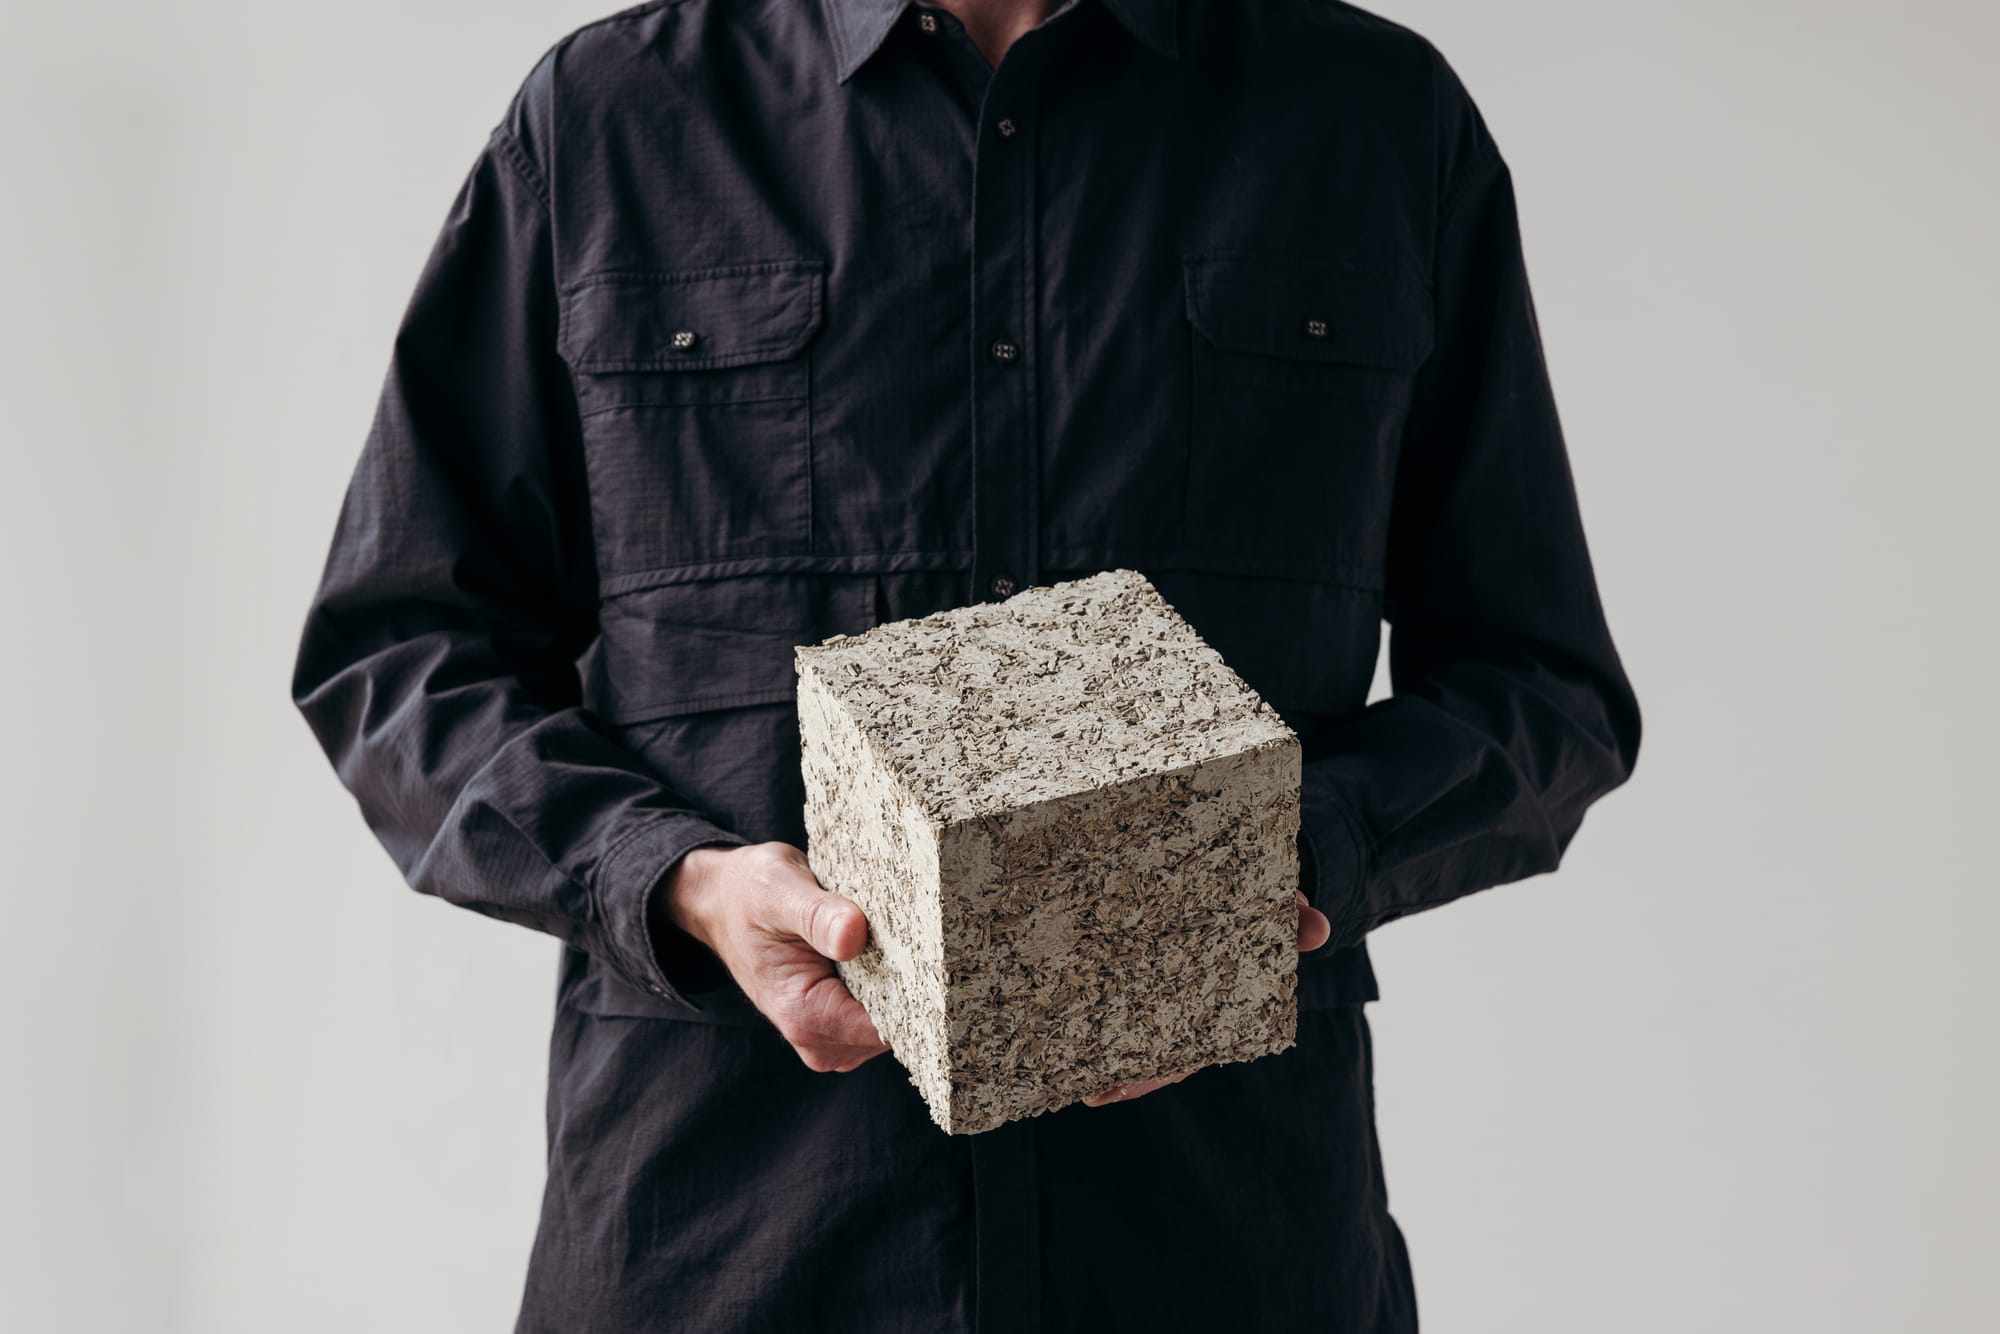 Otetto. Image copyright of Otetto. Man in black button down shirt holding hemp block in front of neutral backdrop.